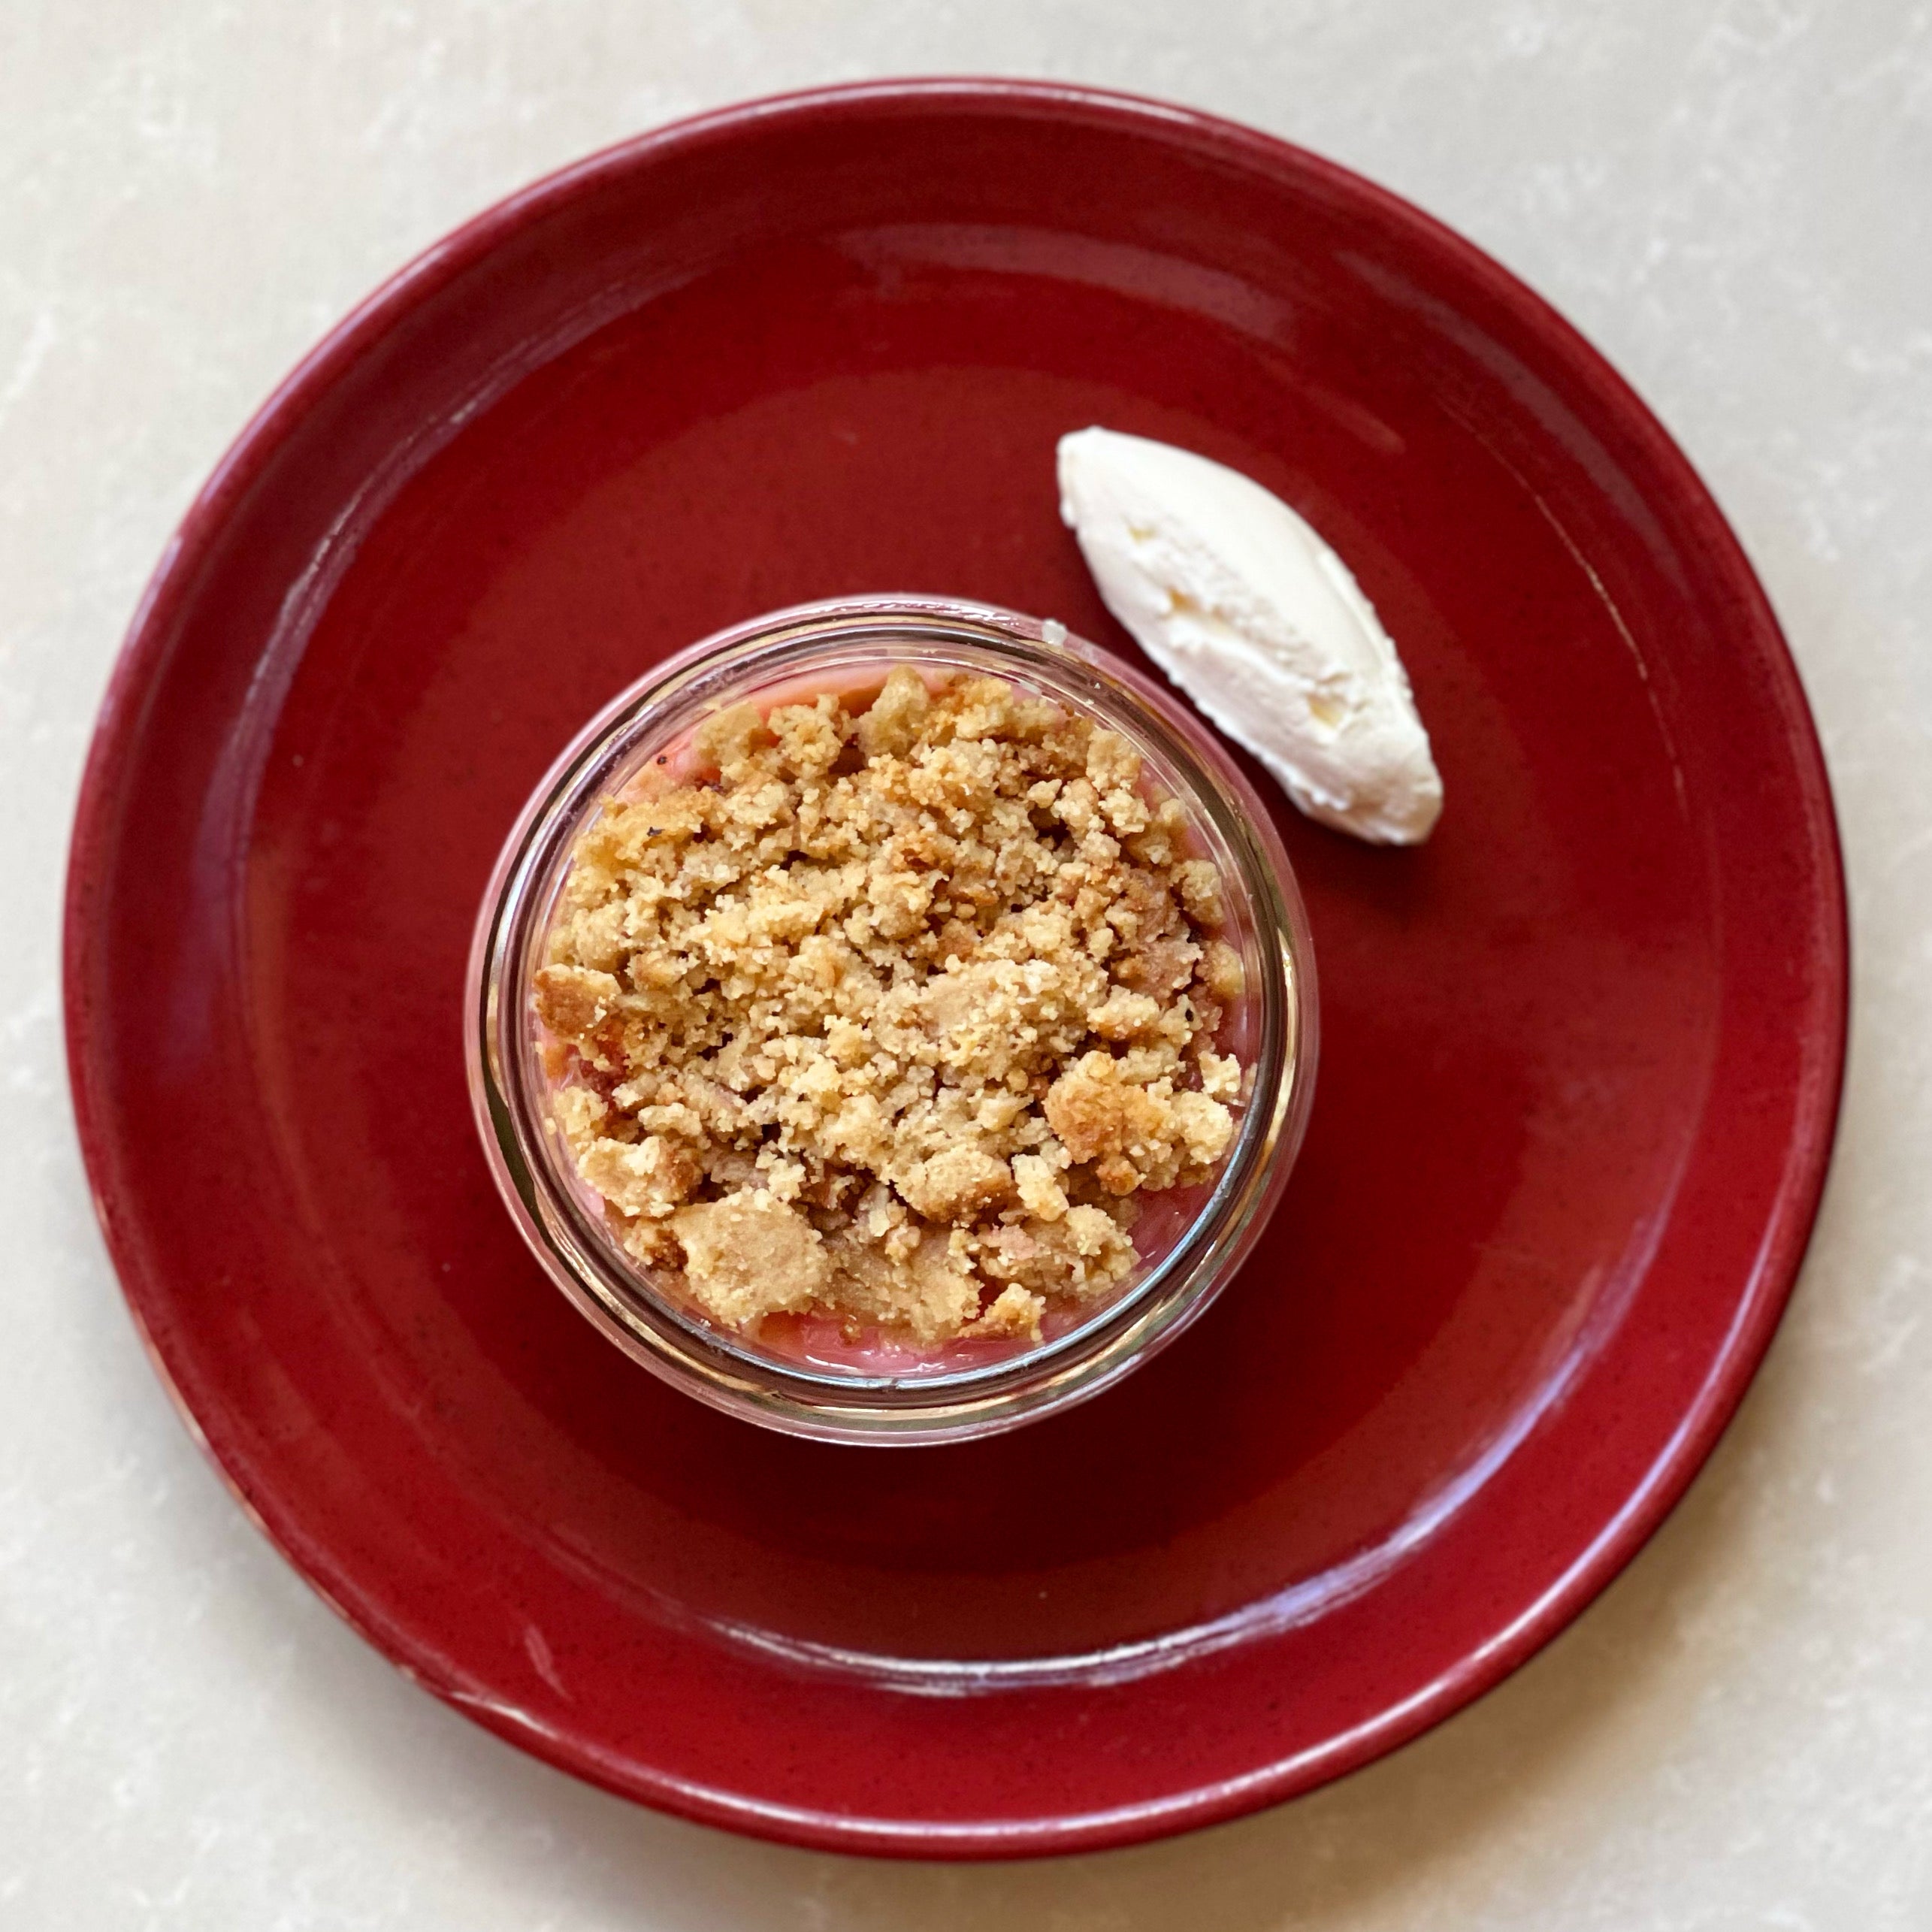 Rhubarb crumble - Available from 8th March